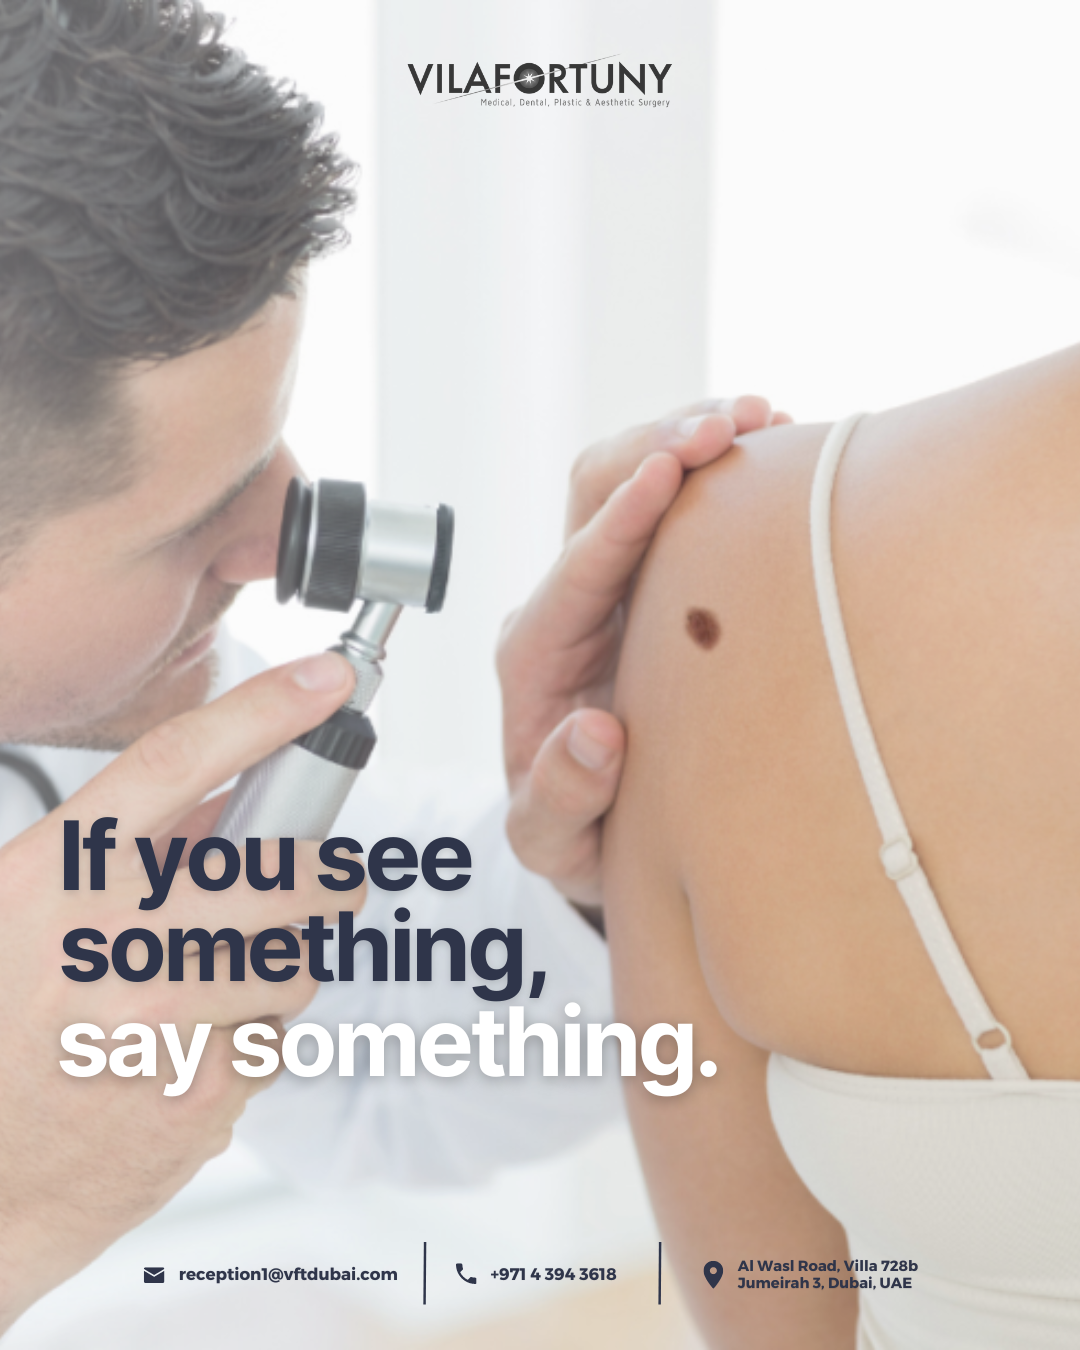 Skin Cancer Screening Services That You Can Trust